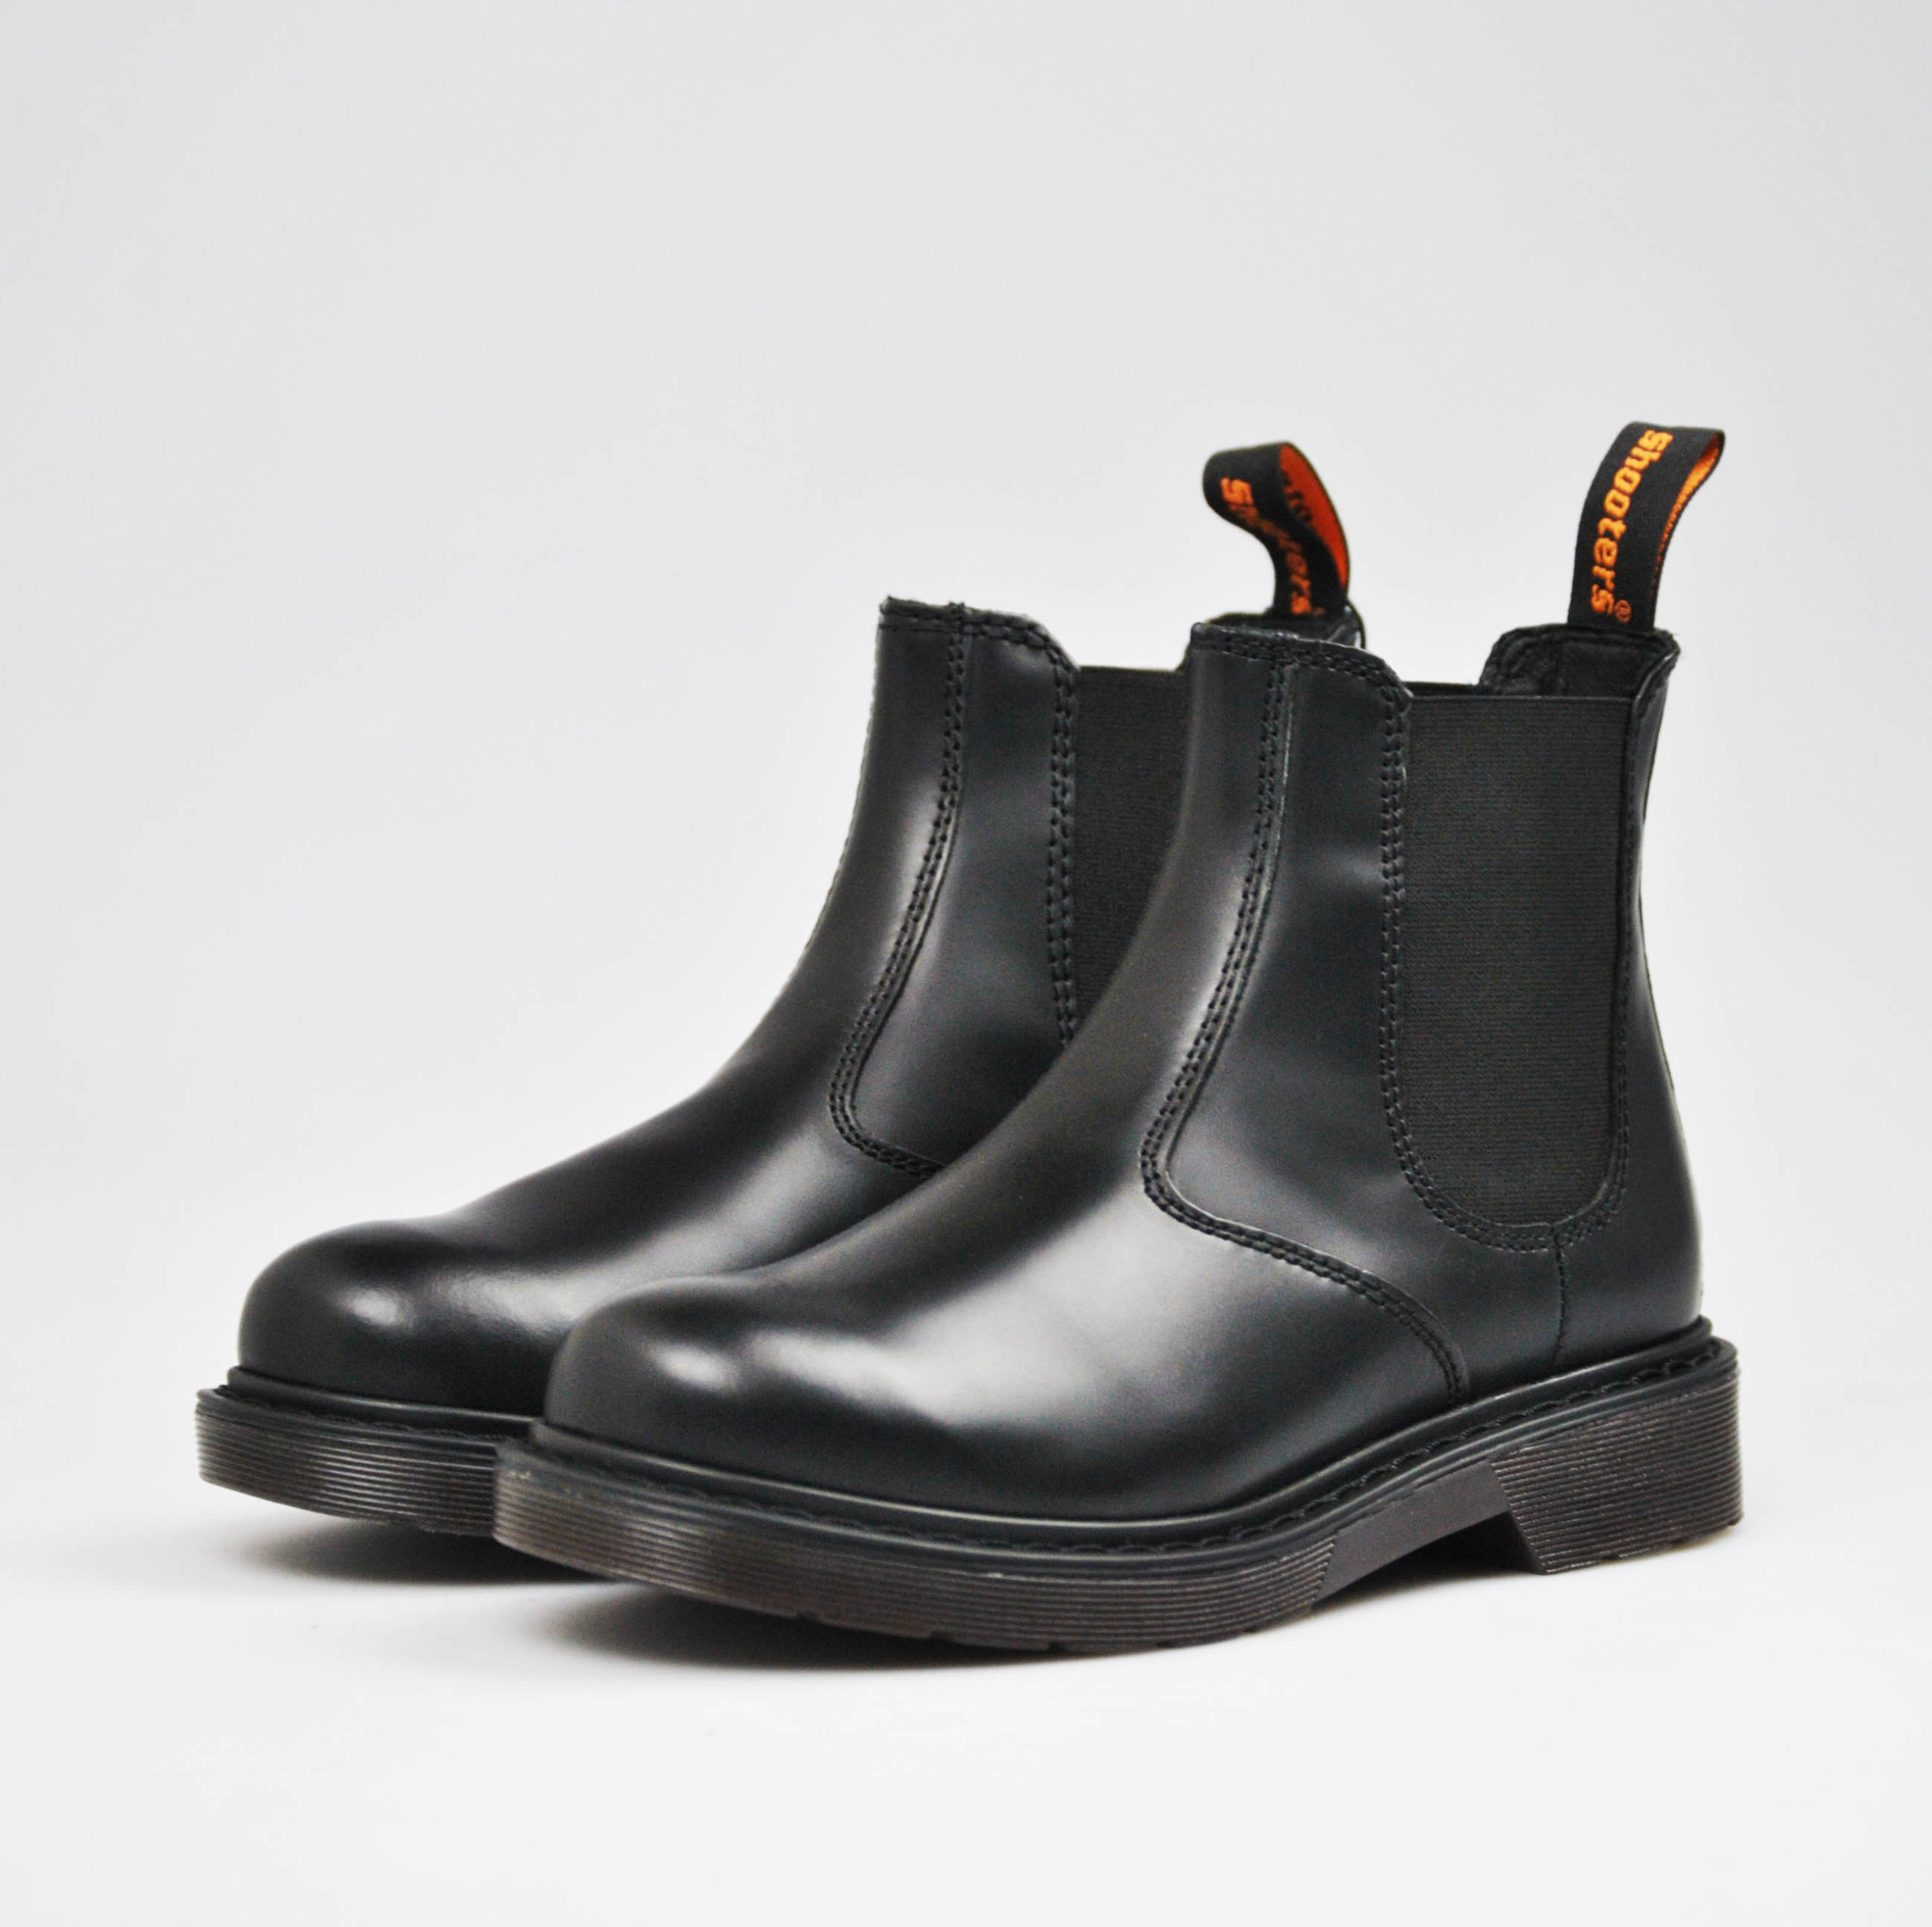 Shooters Chelsea boot in pelle spazzolata Nero art. 9026-05